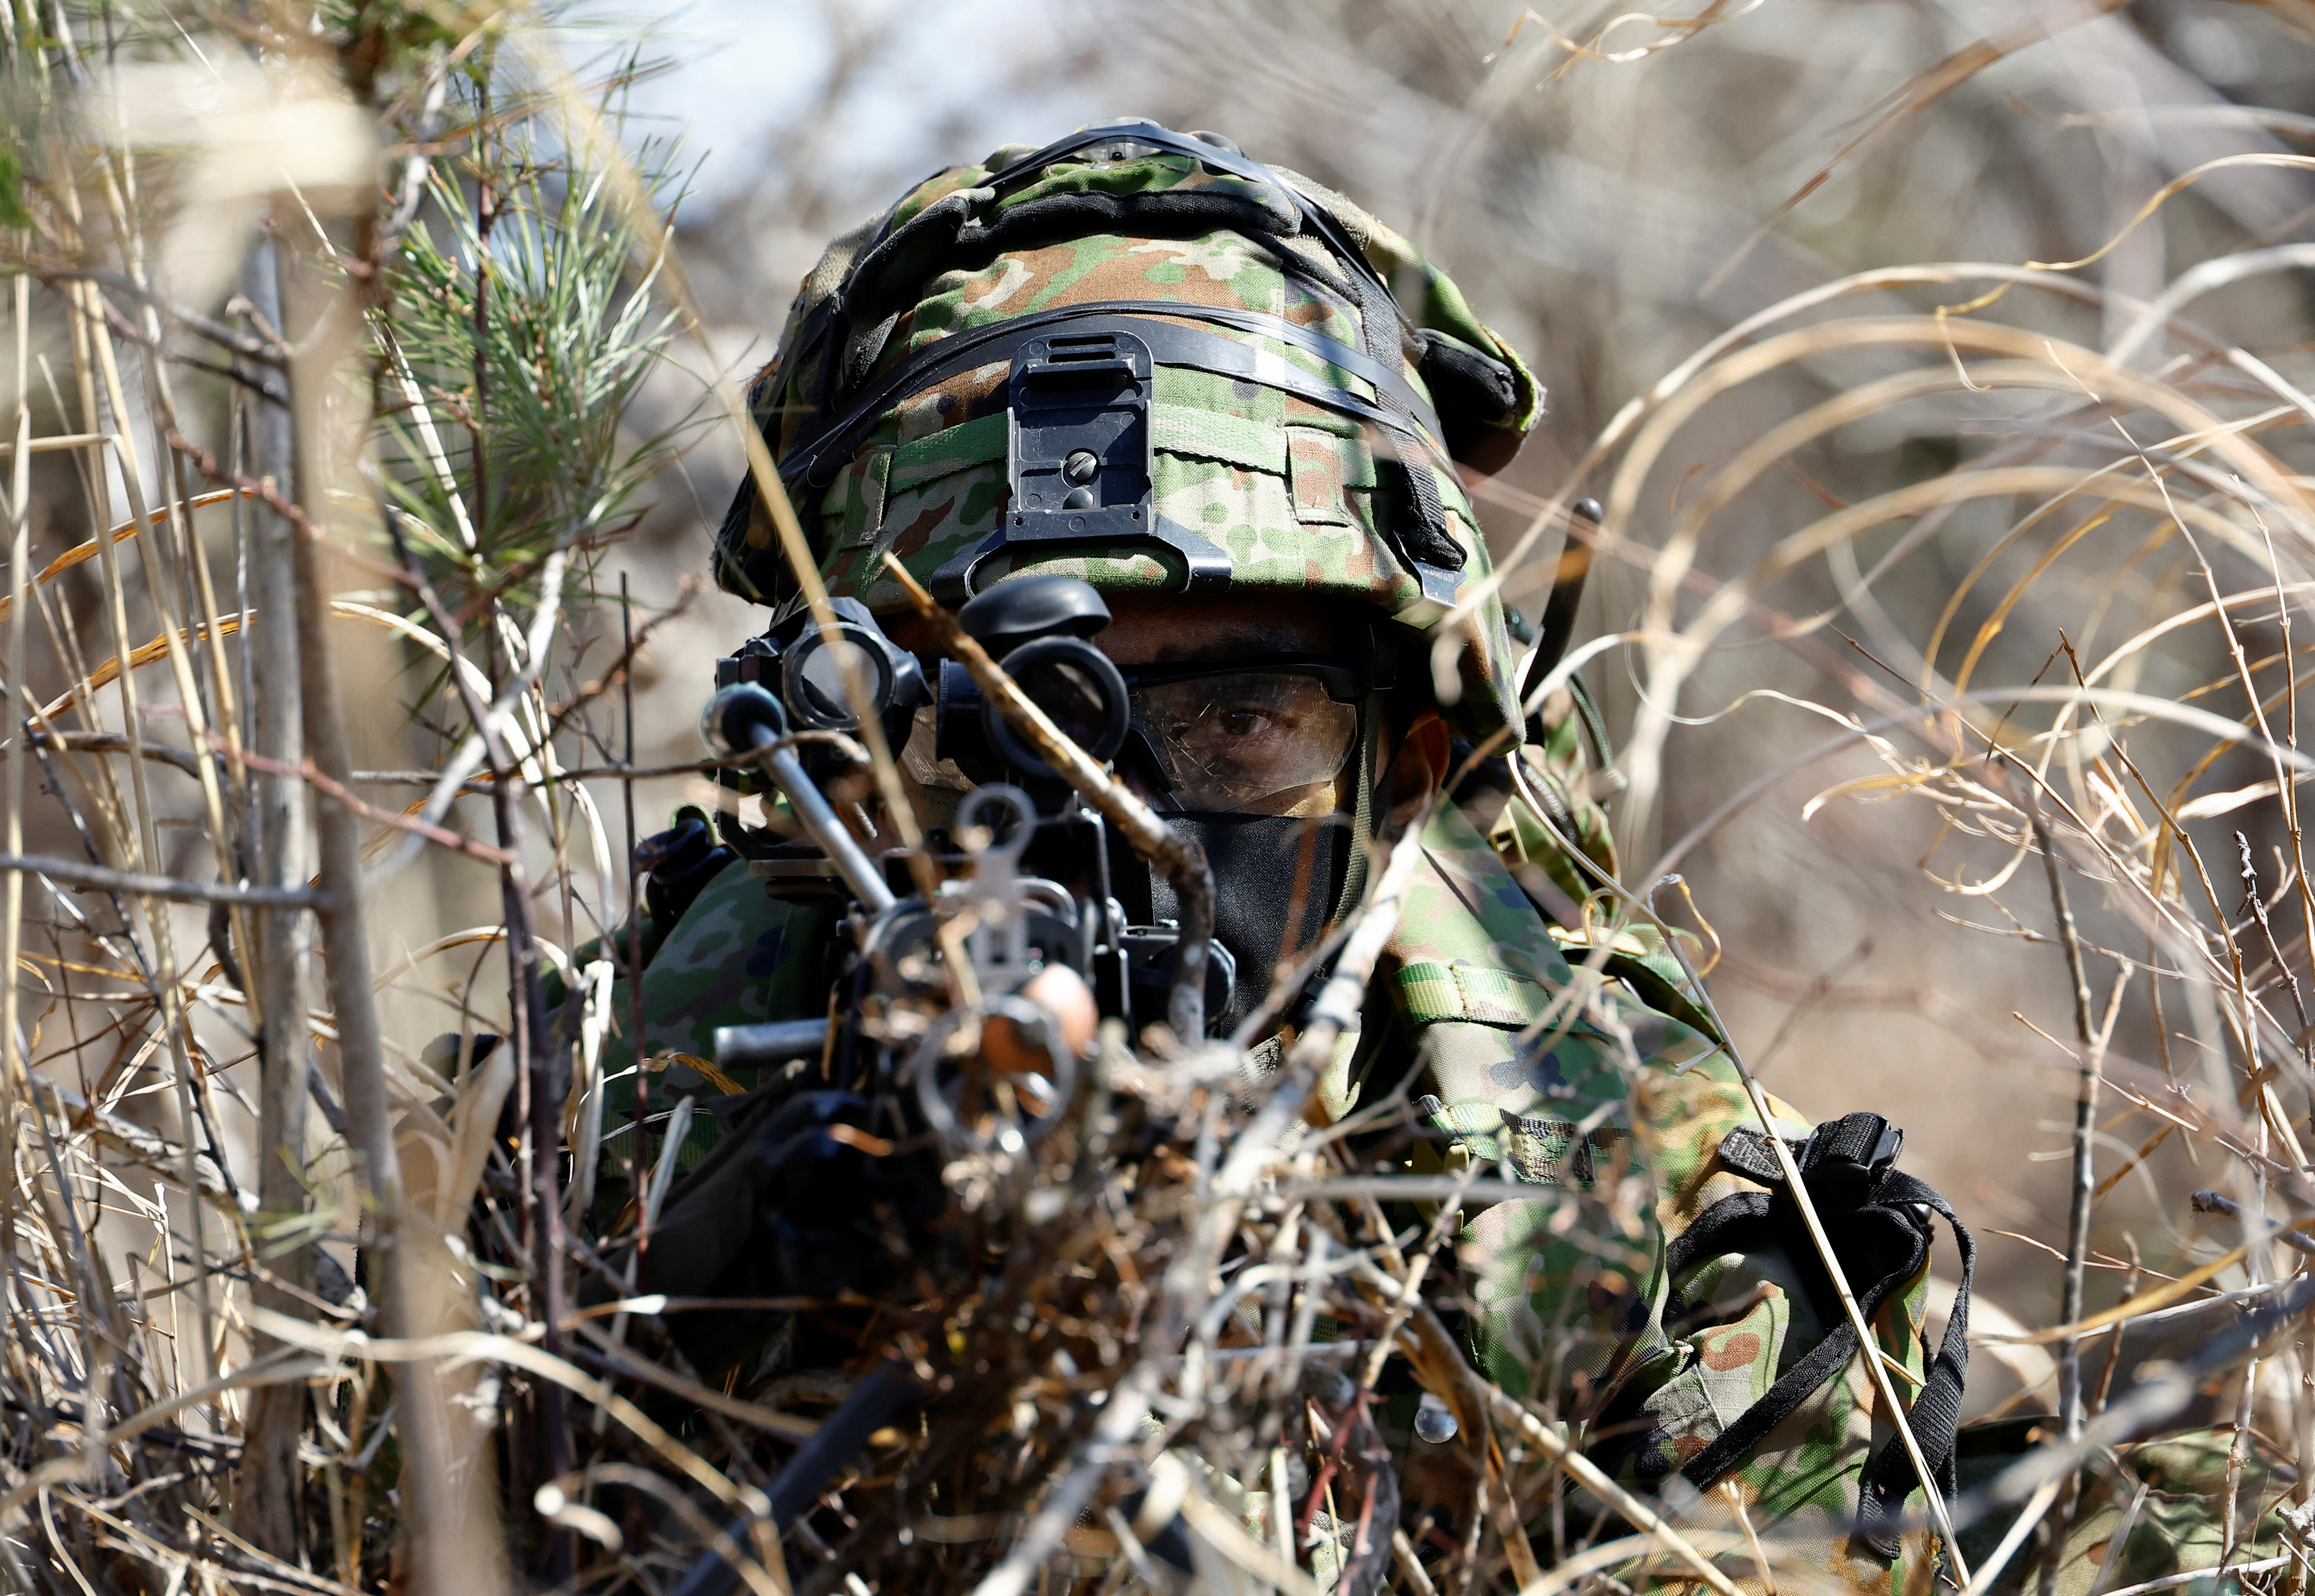 A member of the Japanese Self-Defense Force’s Amphibious Rapid Deployment Brigade aims his gun as he takes a position during joint airborne landing exercises with the U.S.Marine Corps in Gotemba